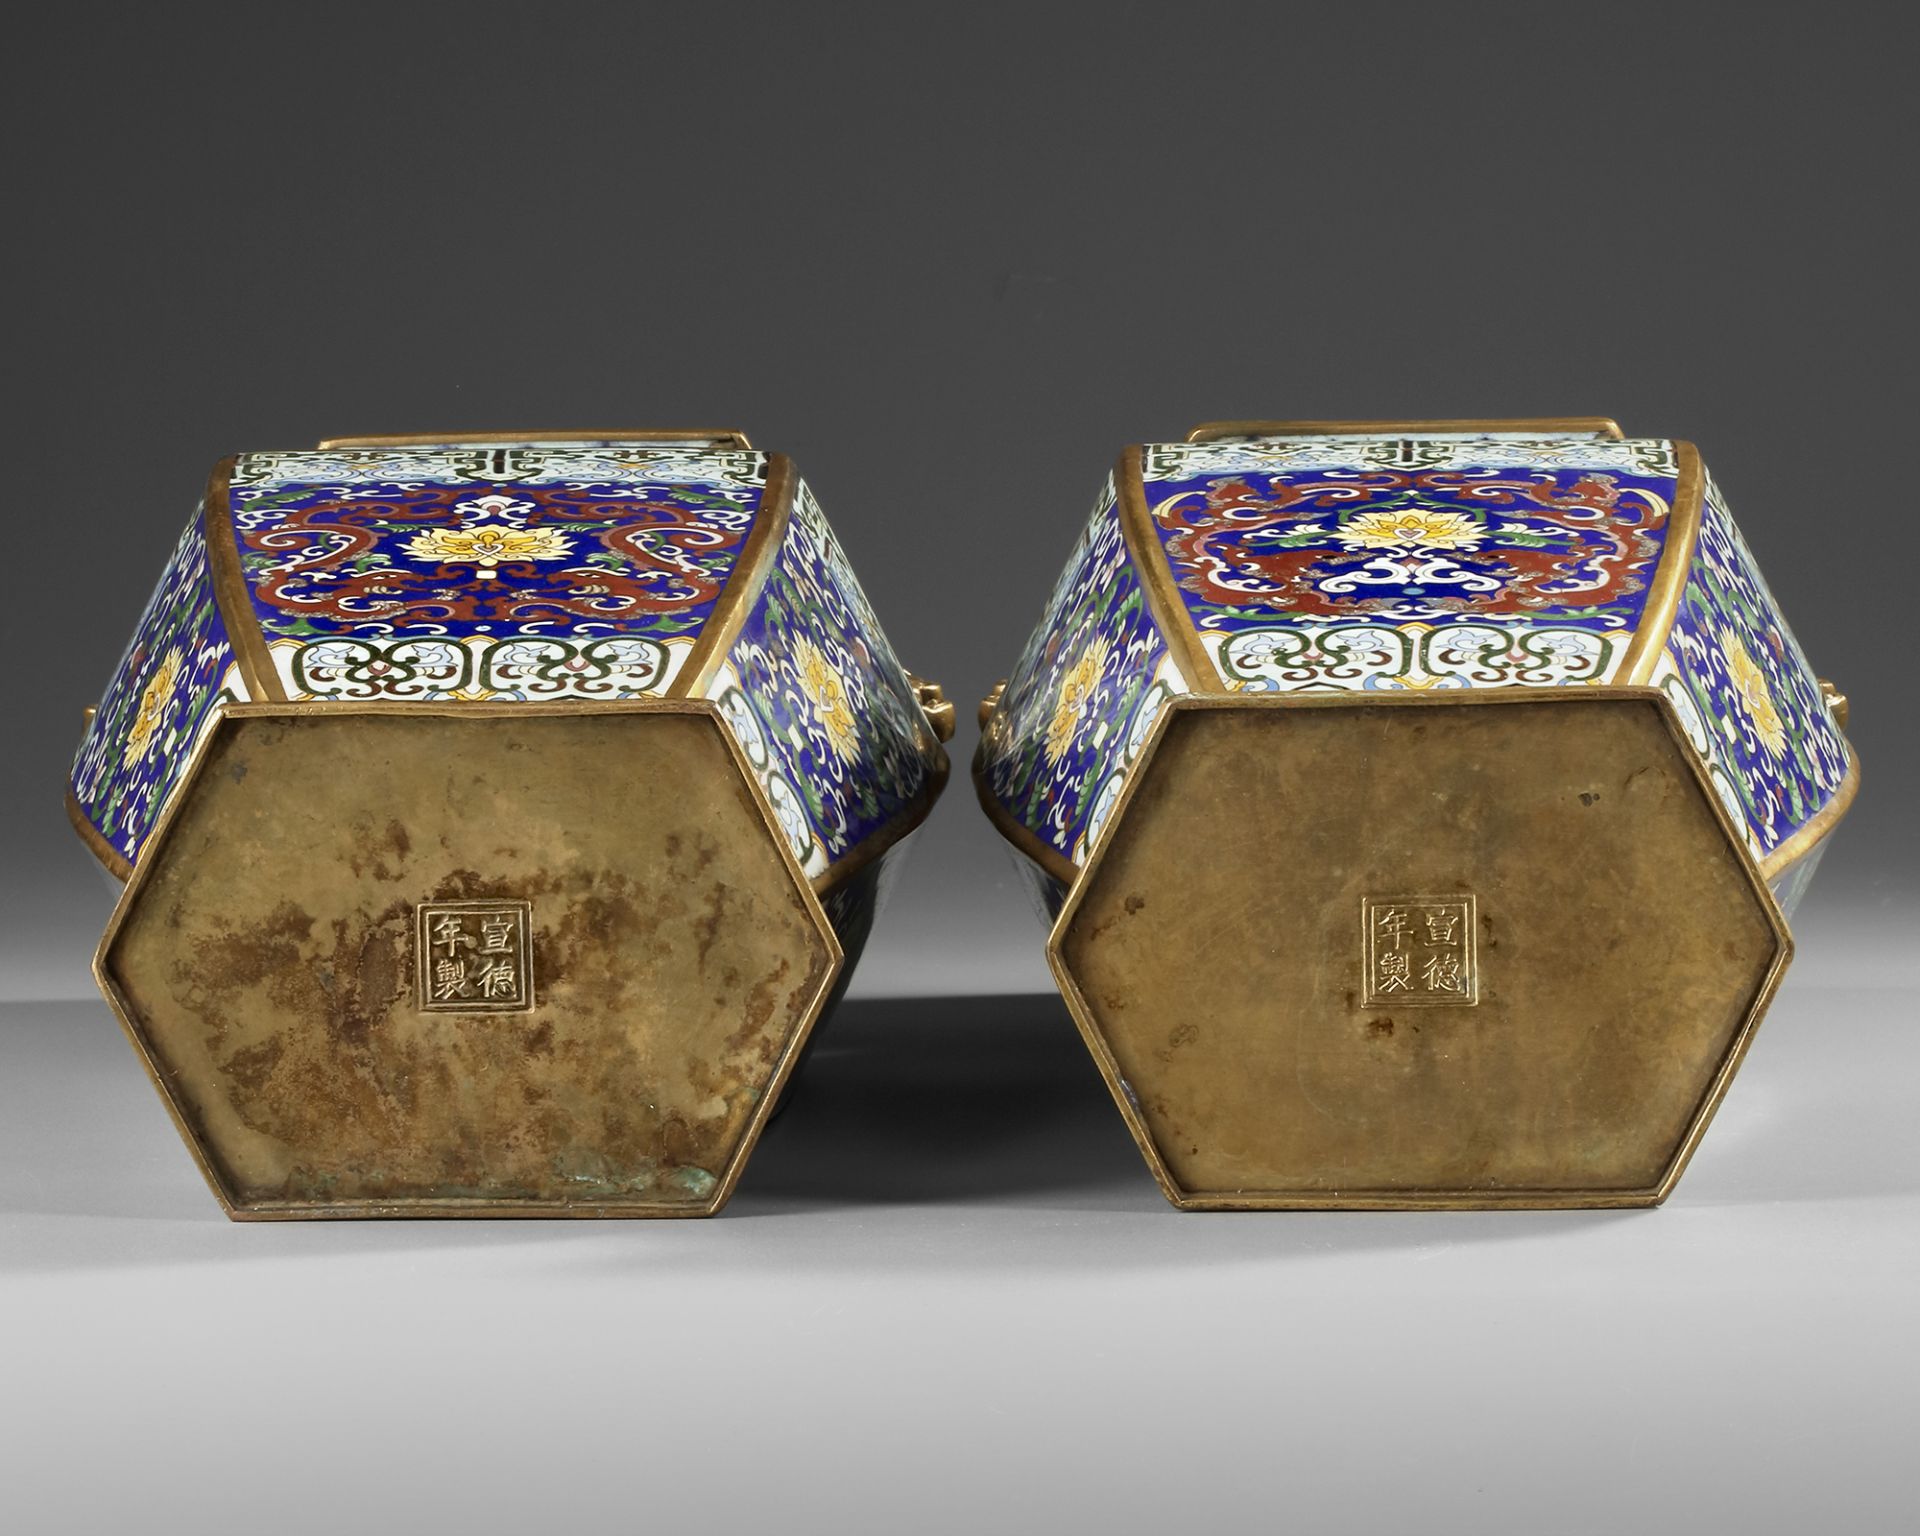 A PAIR OF CHINESE HEXAGONAL ENAMEL CLOISONNÉ VASES, 19TH-20TH CENTURY - Image 4 of 4